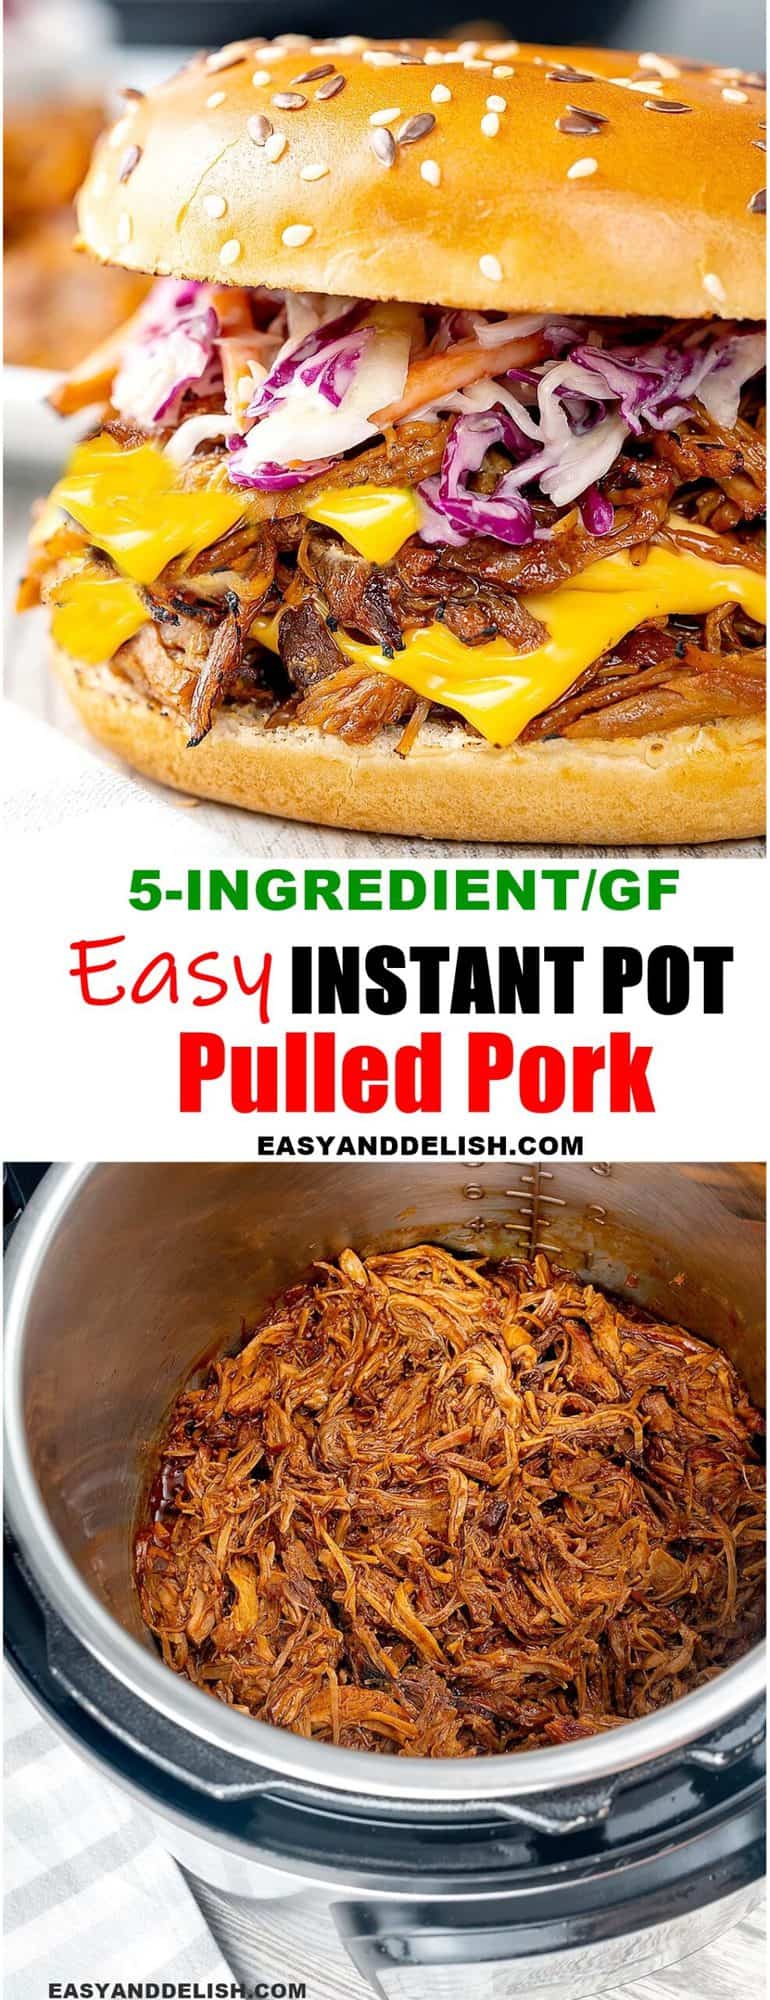 Easy Instant Pot/Pressure Cooker Pulled Pork Recipe - Easy and Delish